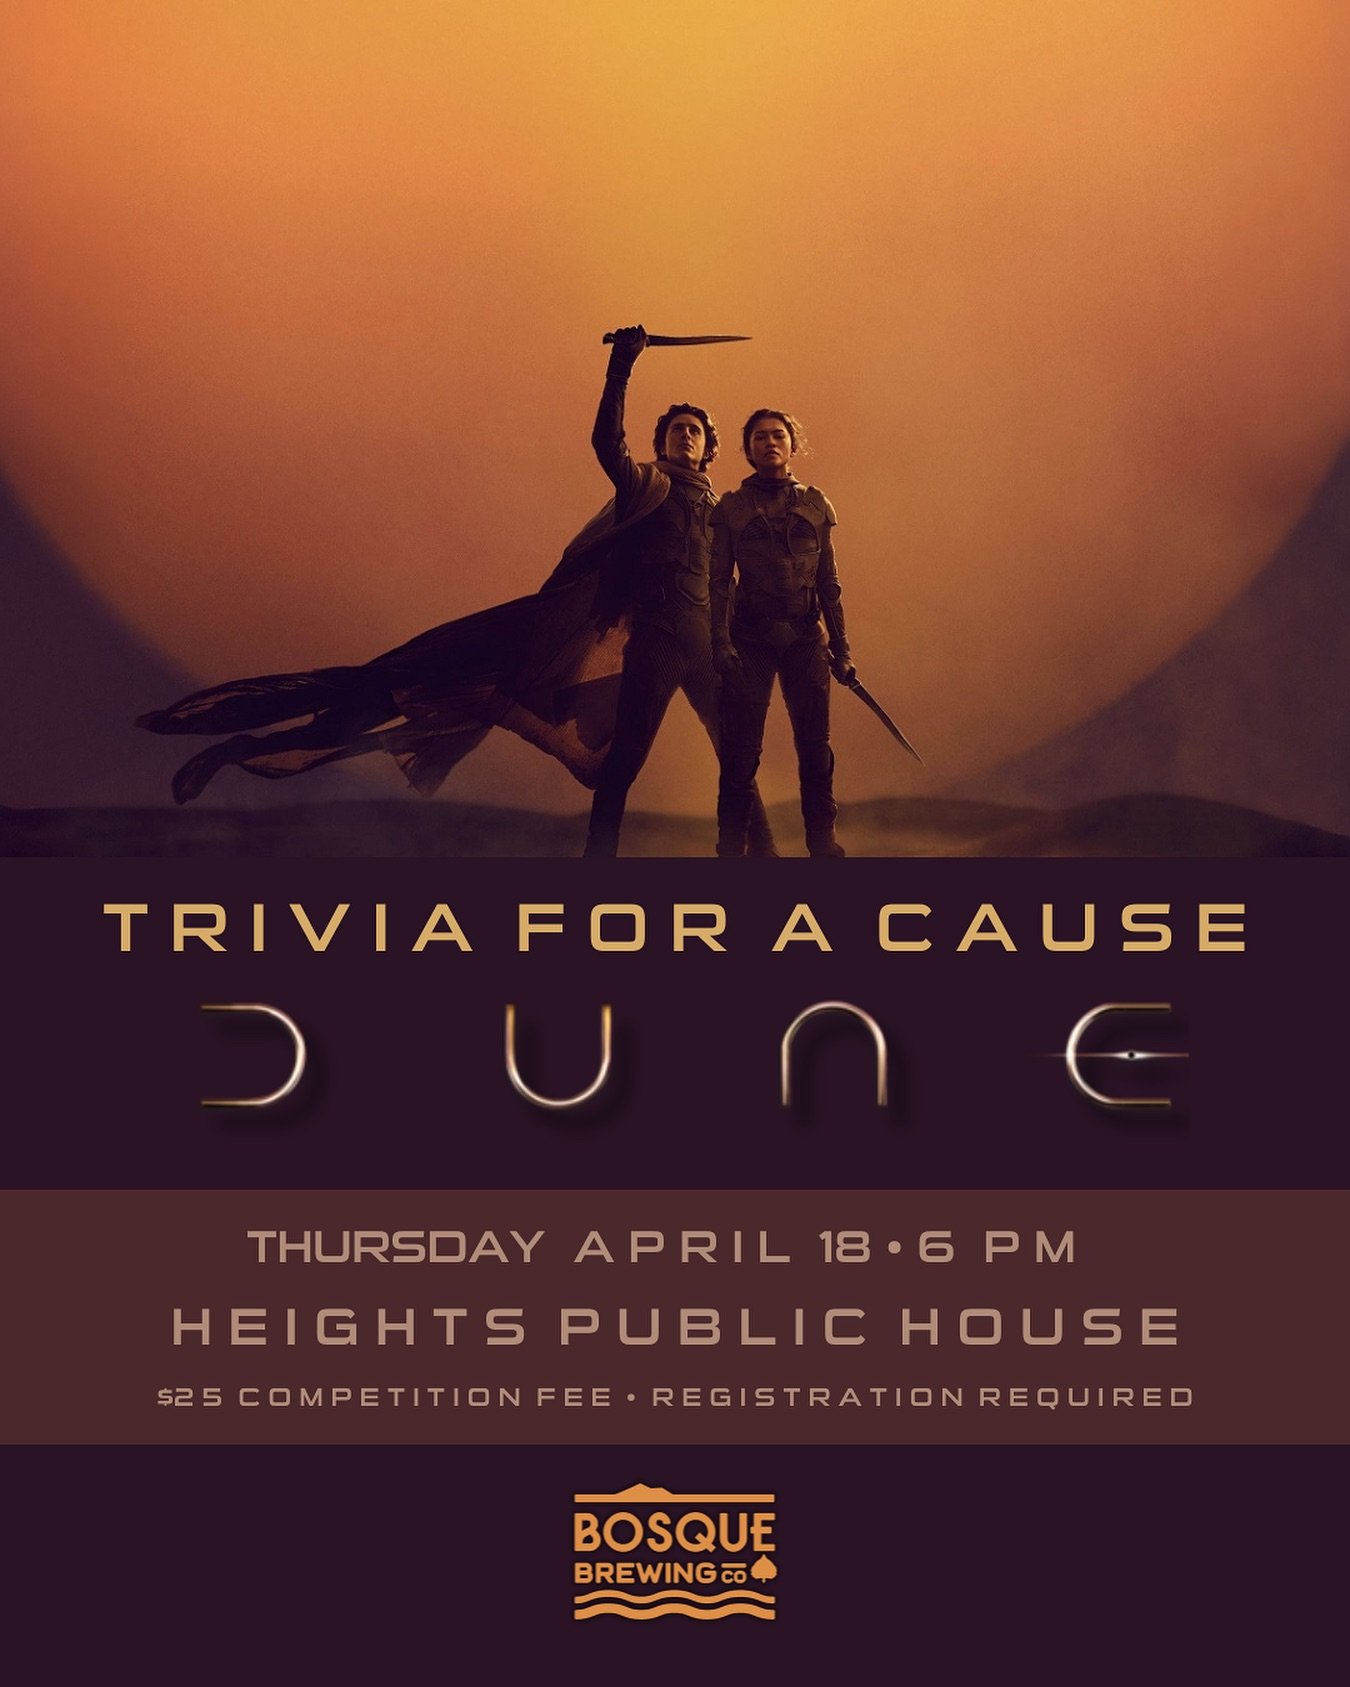 In celebration of the recent release of Dune: Part Two, gather your friends and join us at Trivia for a Cause: Dune edition! 

📍Thursday, April 18th at 6 PM @ the Heights Public House. (5210 Eubank Blvd. NE Albuquerque, NM 87111)

🎟️Registration re